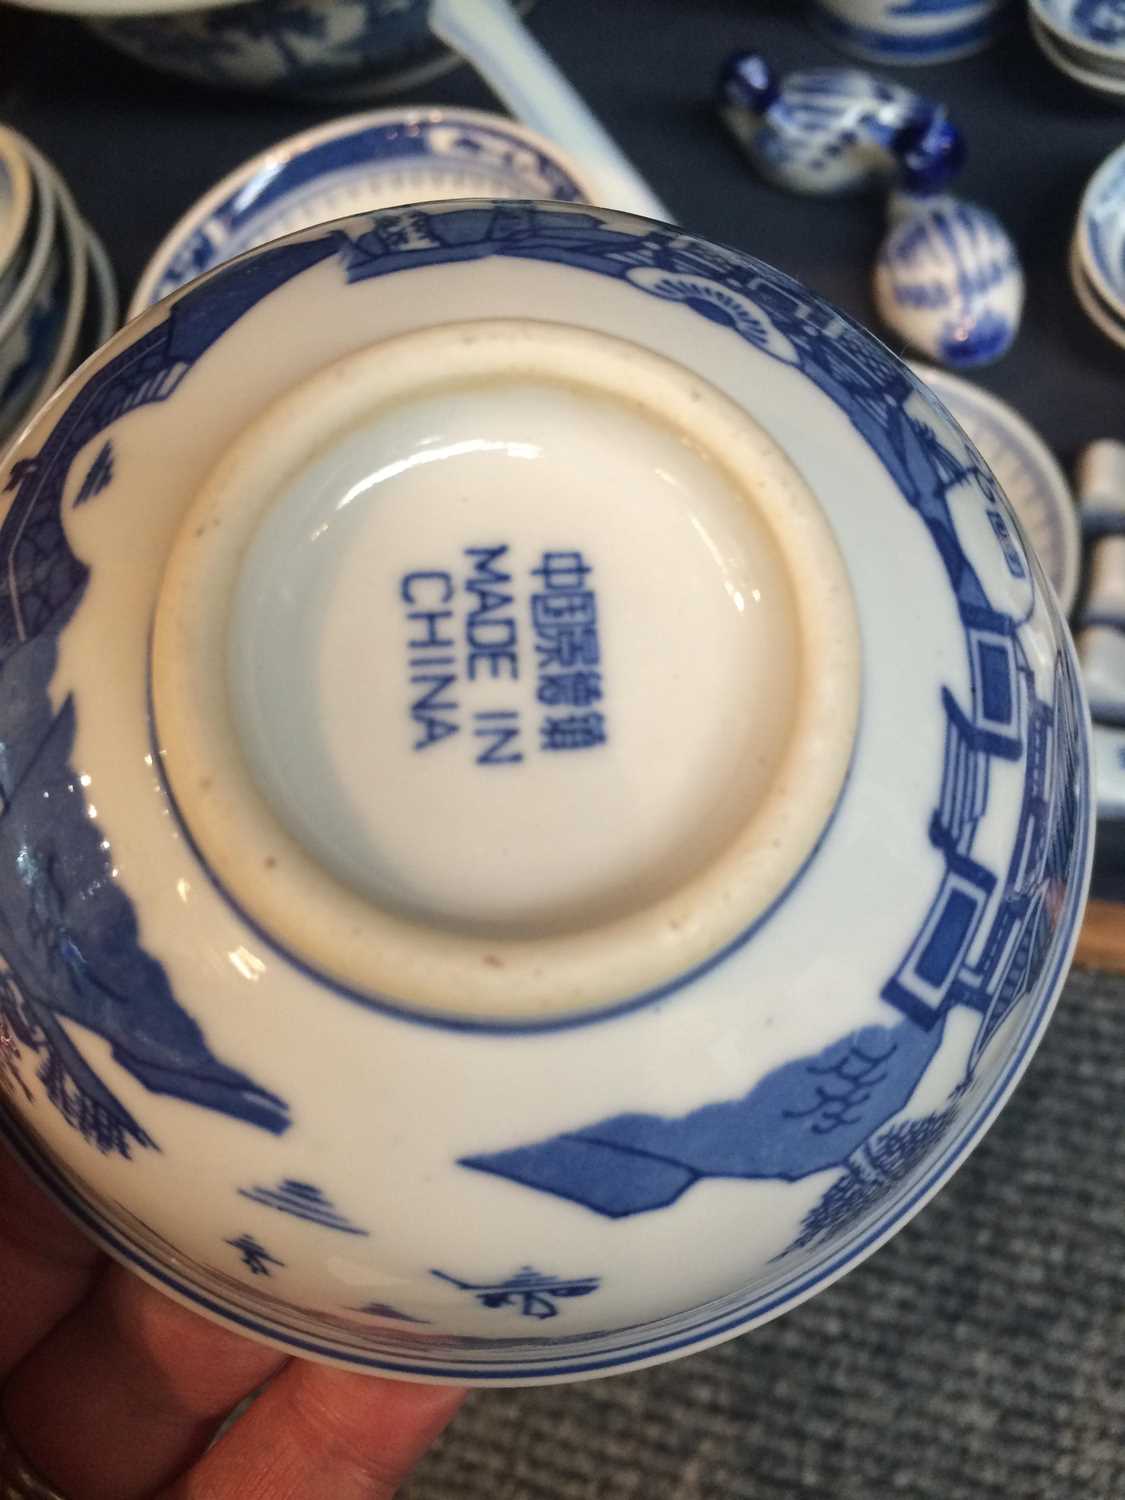 A Comprehensive Chinese Porcelain Dinner Service, painted in underglaze blue in the 18th century - Image 7 of 13